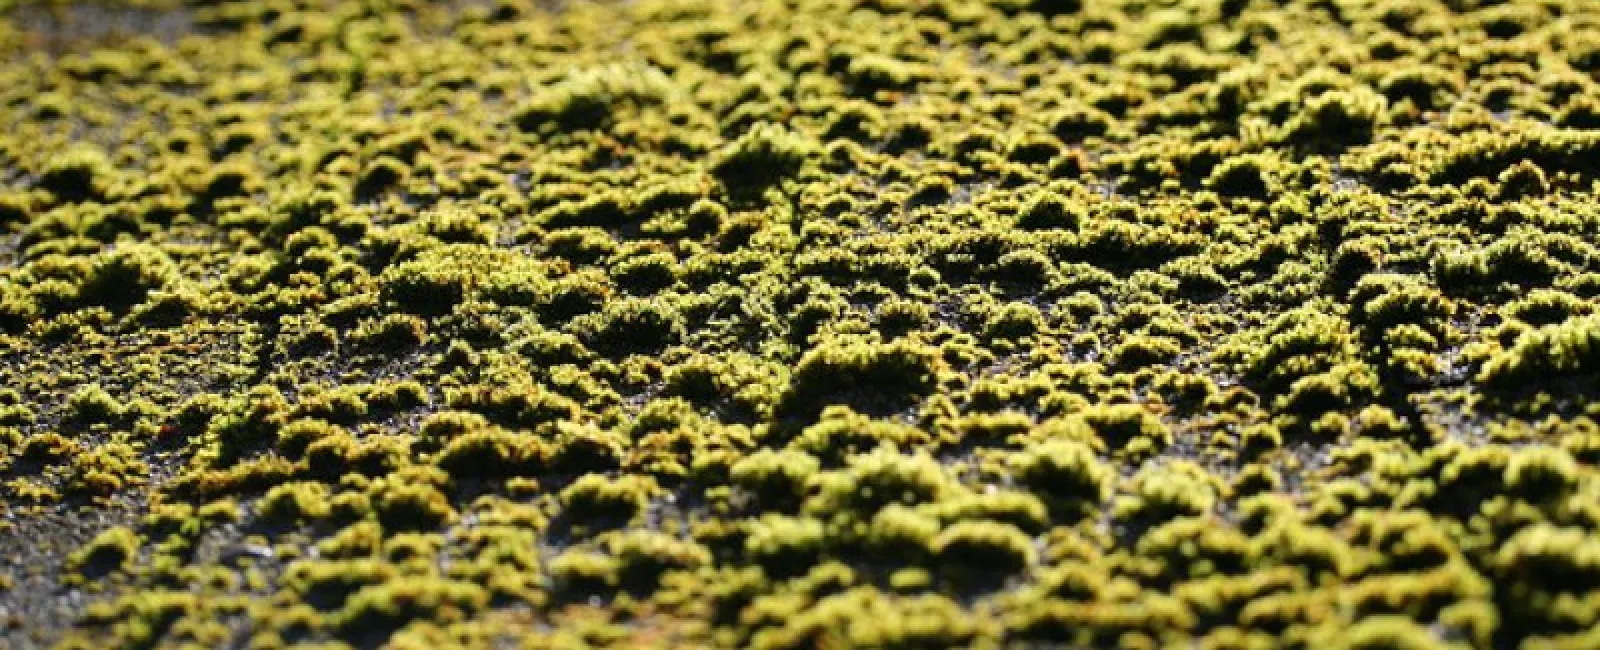 Moss on a Roof: Major warning sign